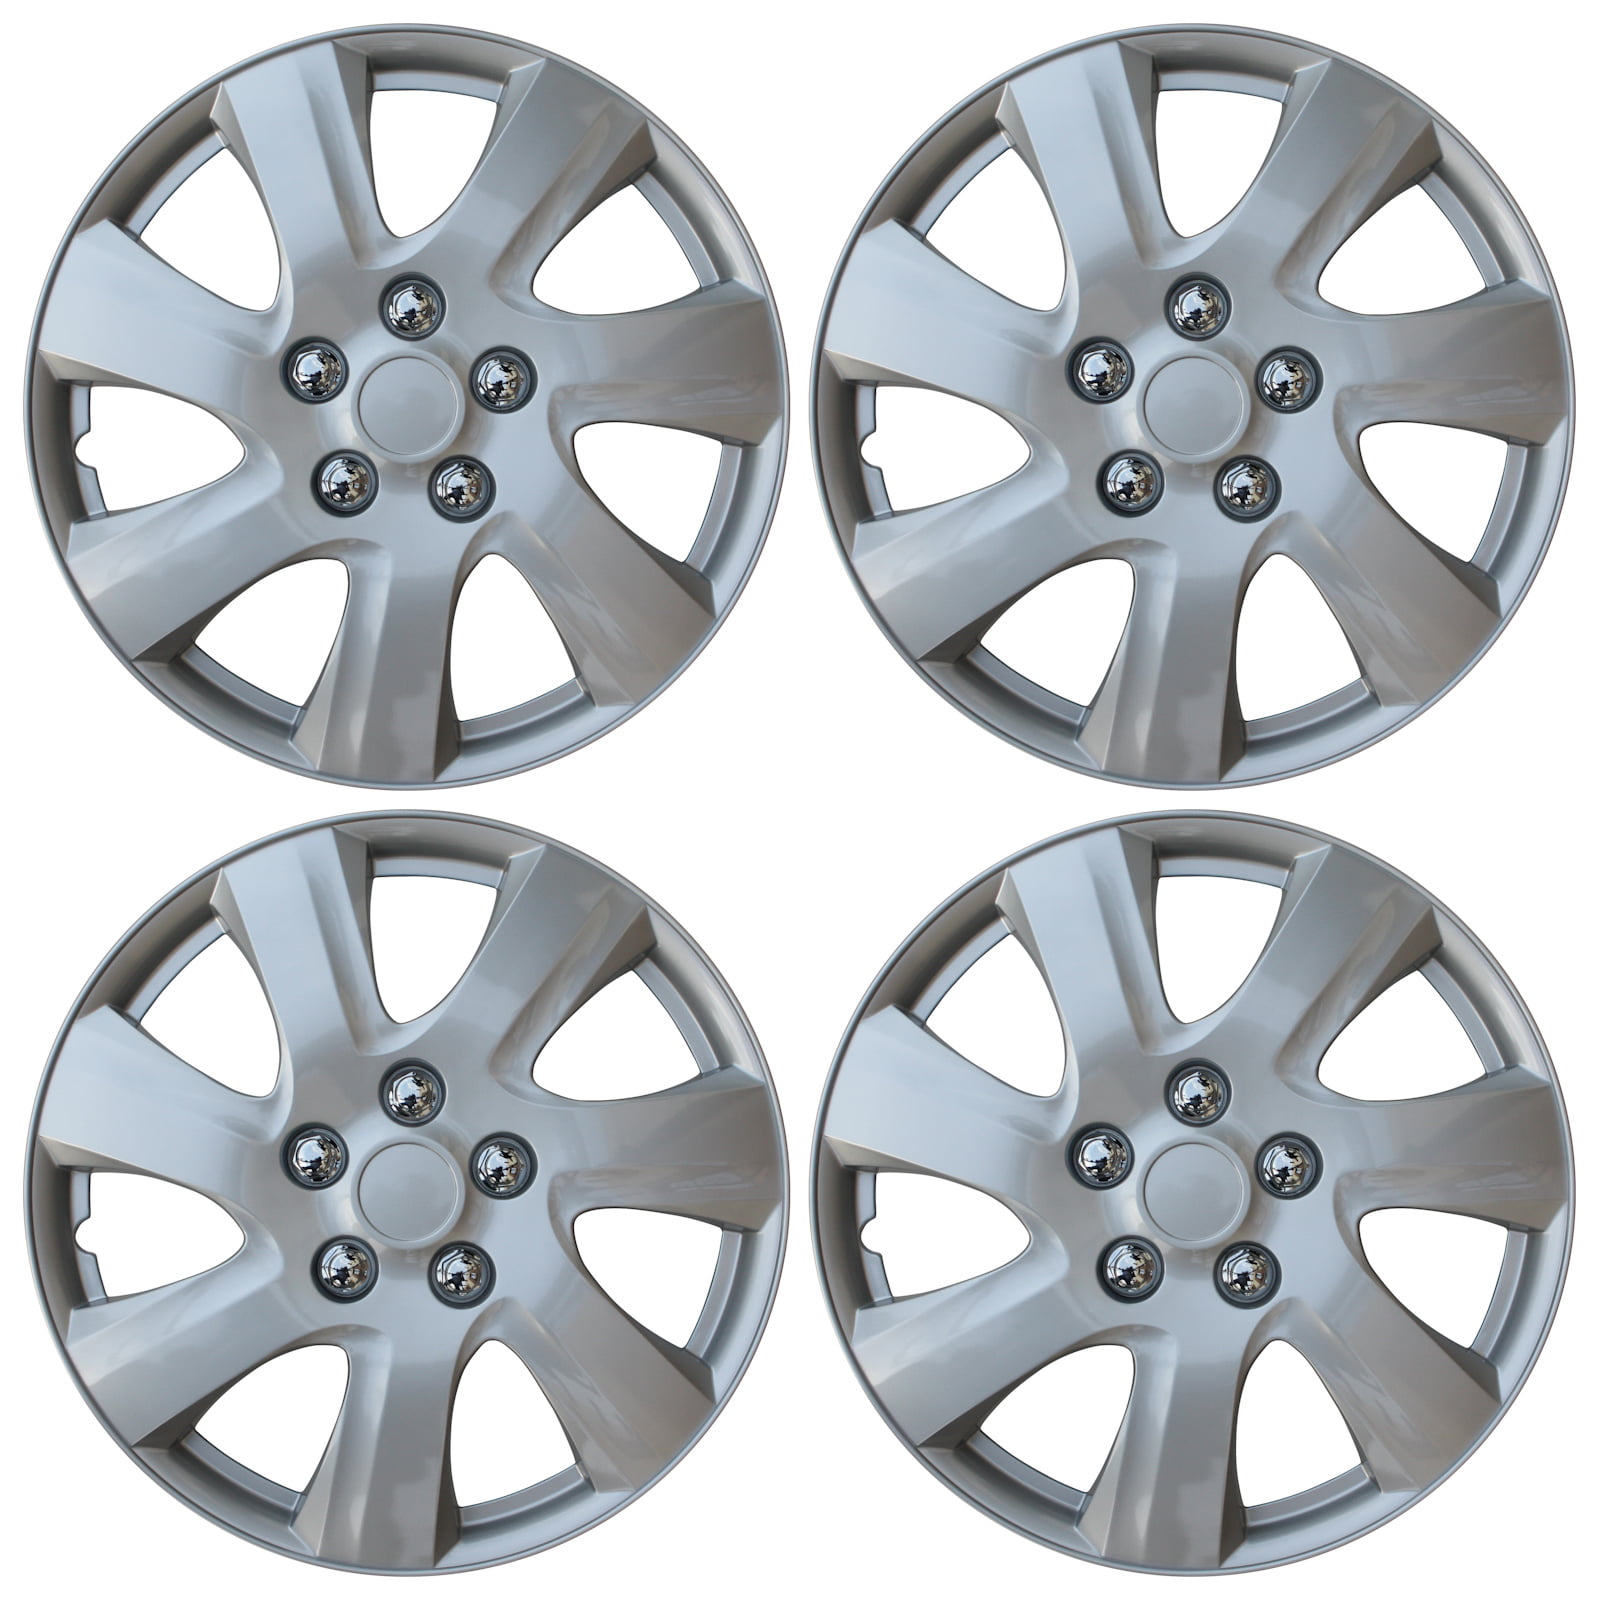 Rims Cover Wheel Skin Covers 15" Inches ABS Plastic Hubcap 4pcs Style #B721